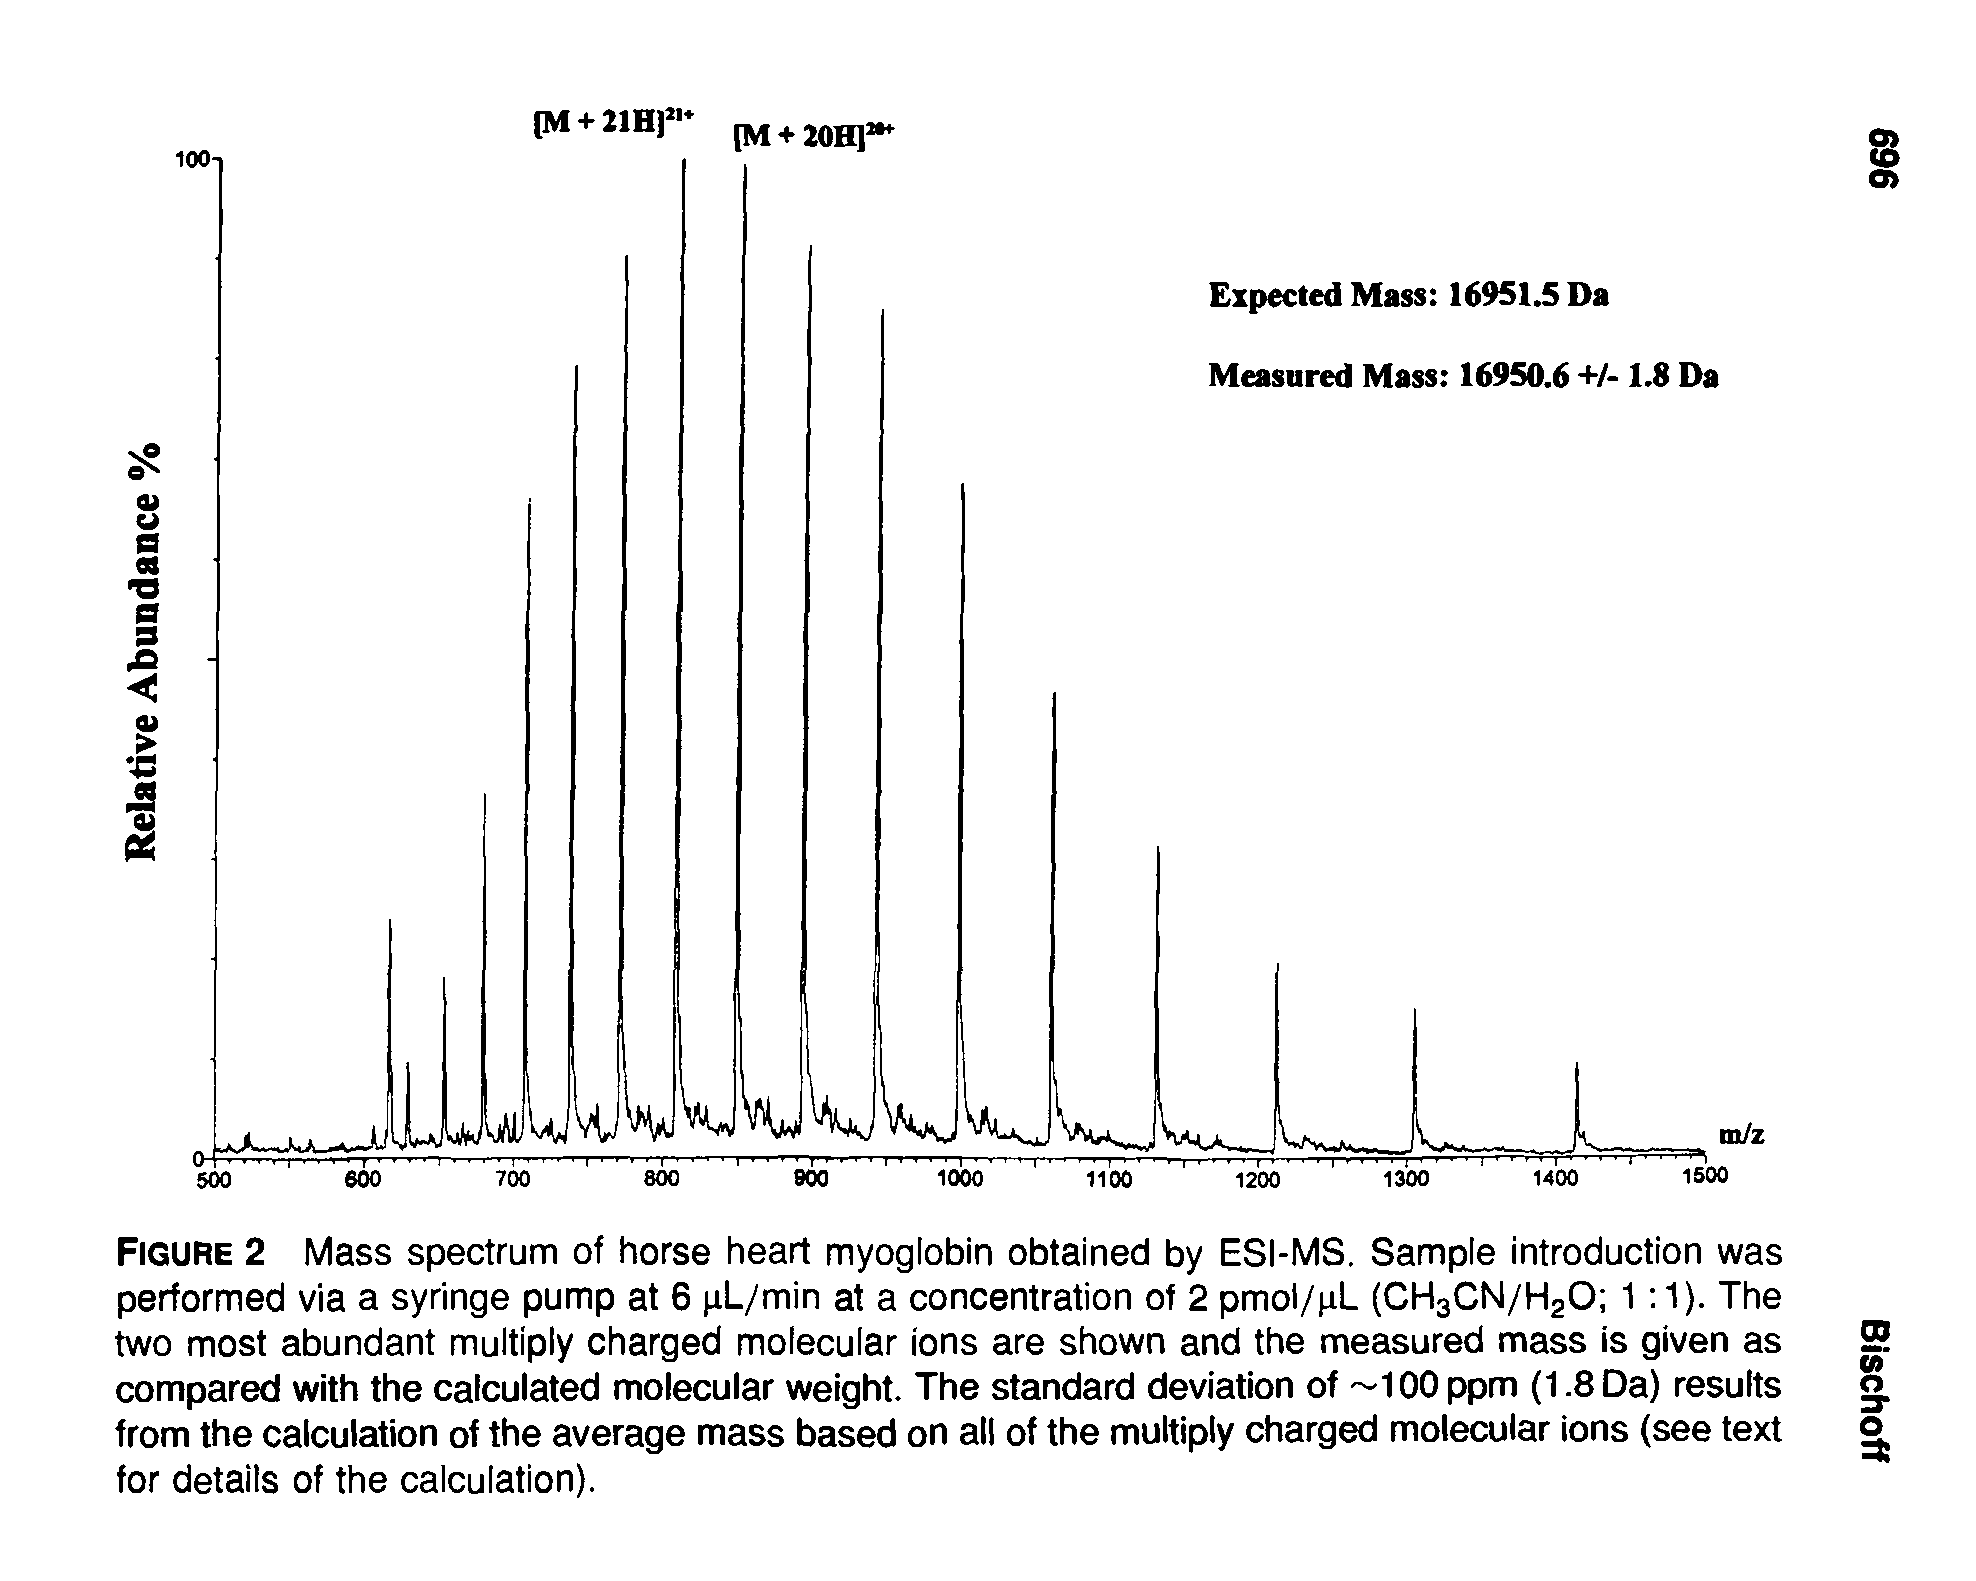 Figure 2 Mass spectrum of horse heart myoglobin obtained by ESI-MS. Sample introduction was performed via a syringe pump at 6 nL/min at a concentration of 2 pmol/nL (CH3CN/H2O 1 1). The two most abundant multiply charged molecular ions are shown and the measured mass is given as compared with the calculated molecular weight. The standard deviation of 100ppm (1.8 Da) results from the calculation of the average mass based on all of the multiply charged molecular ions (see text for details of the calculation).